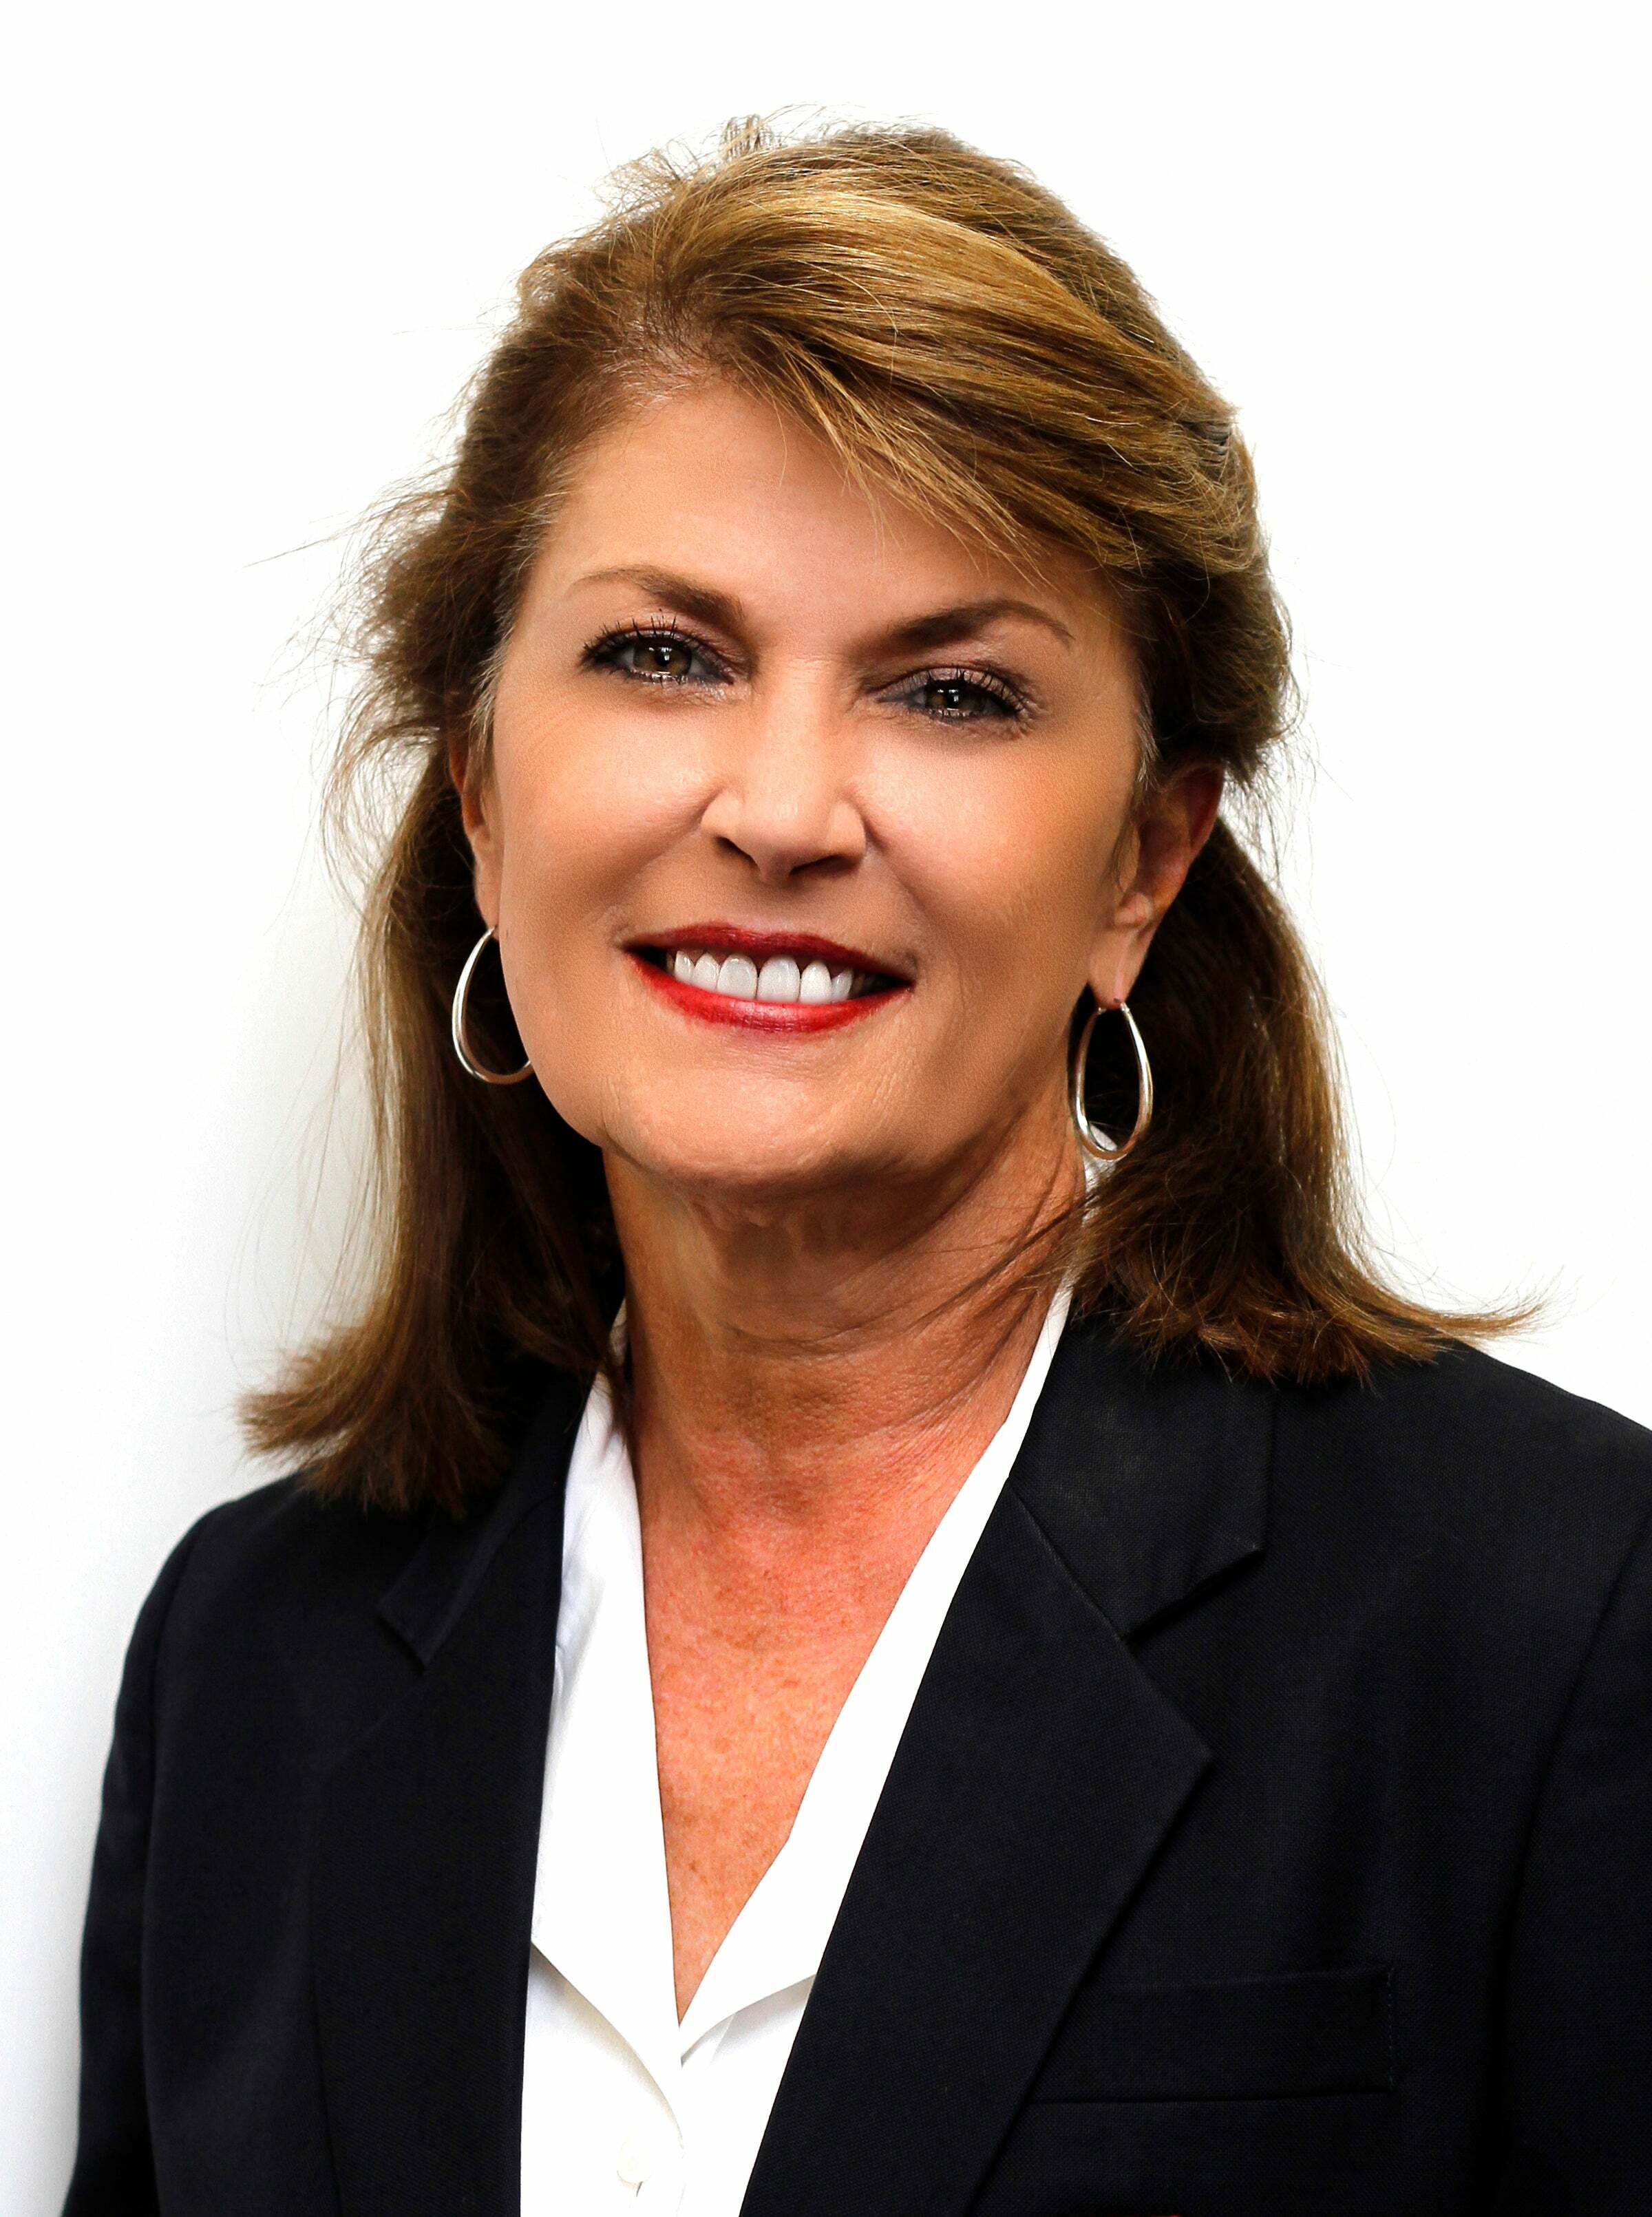 Lynne Stanford, Real Estate Salesperson in Pell City, ERA King Real Estate Company, Inc.